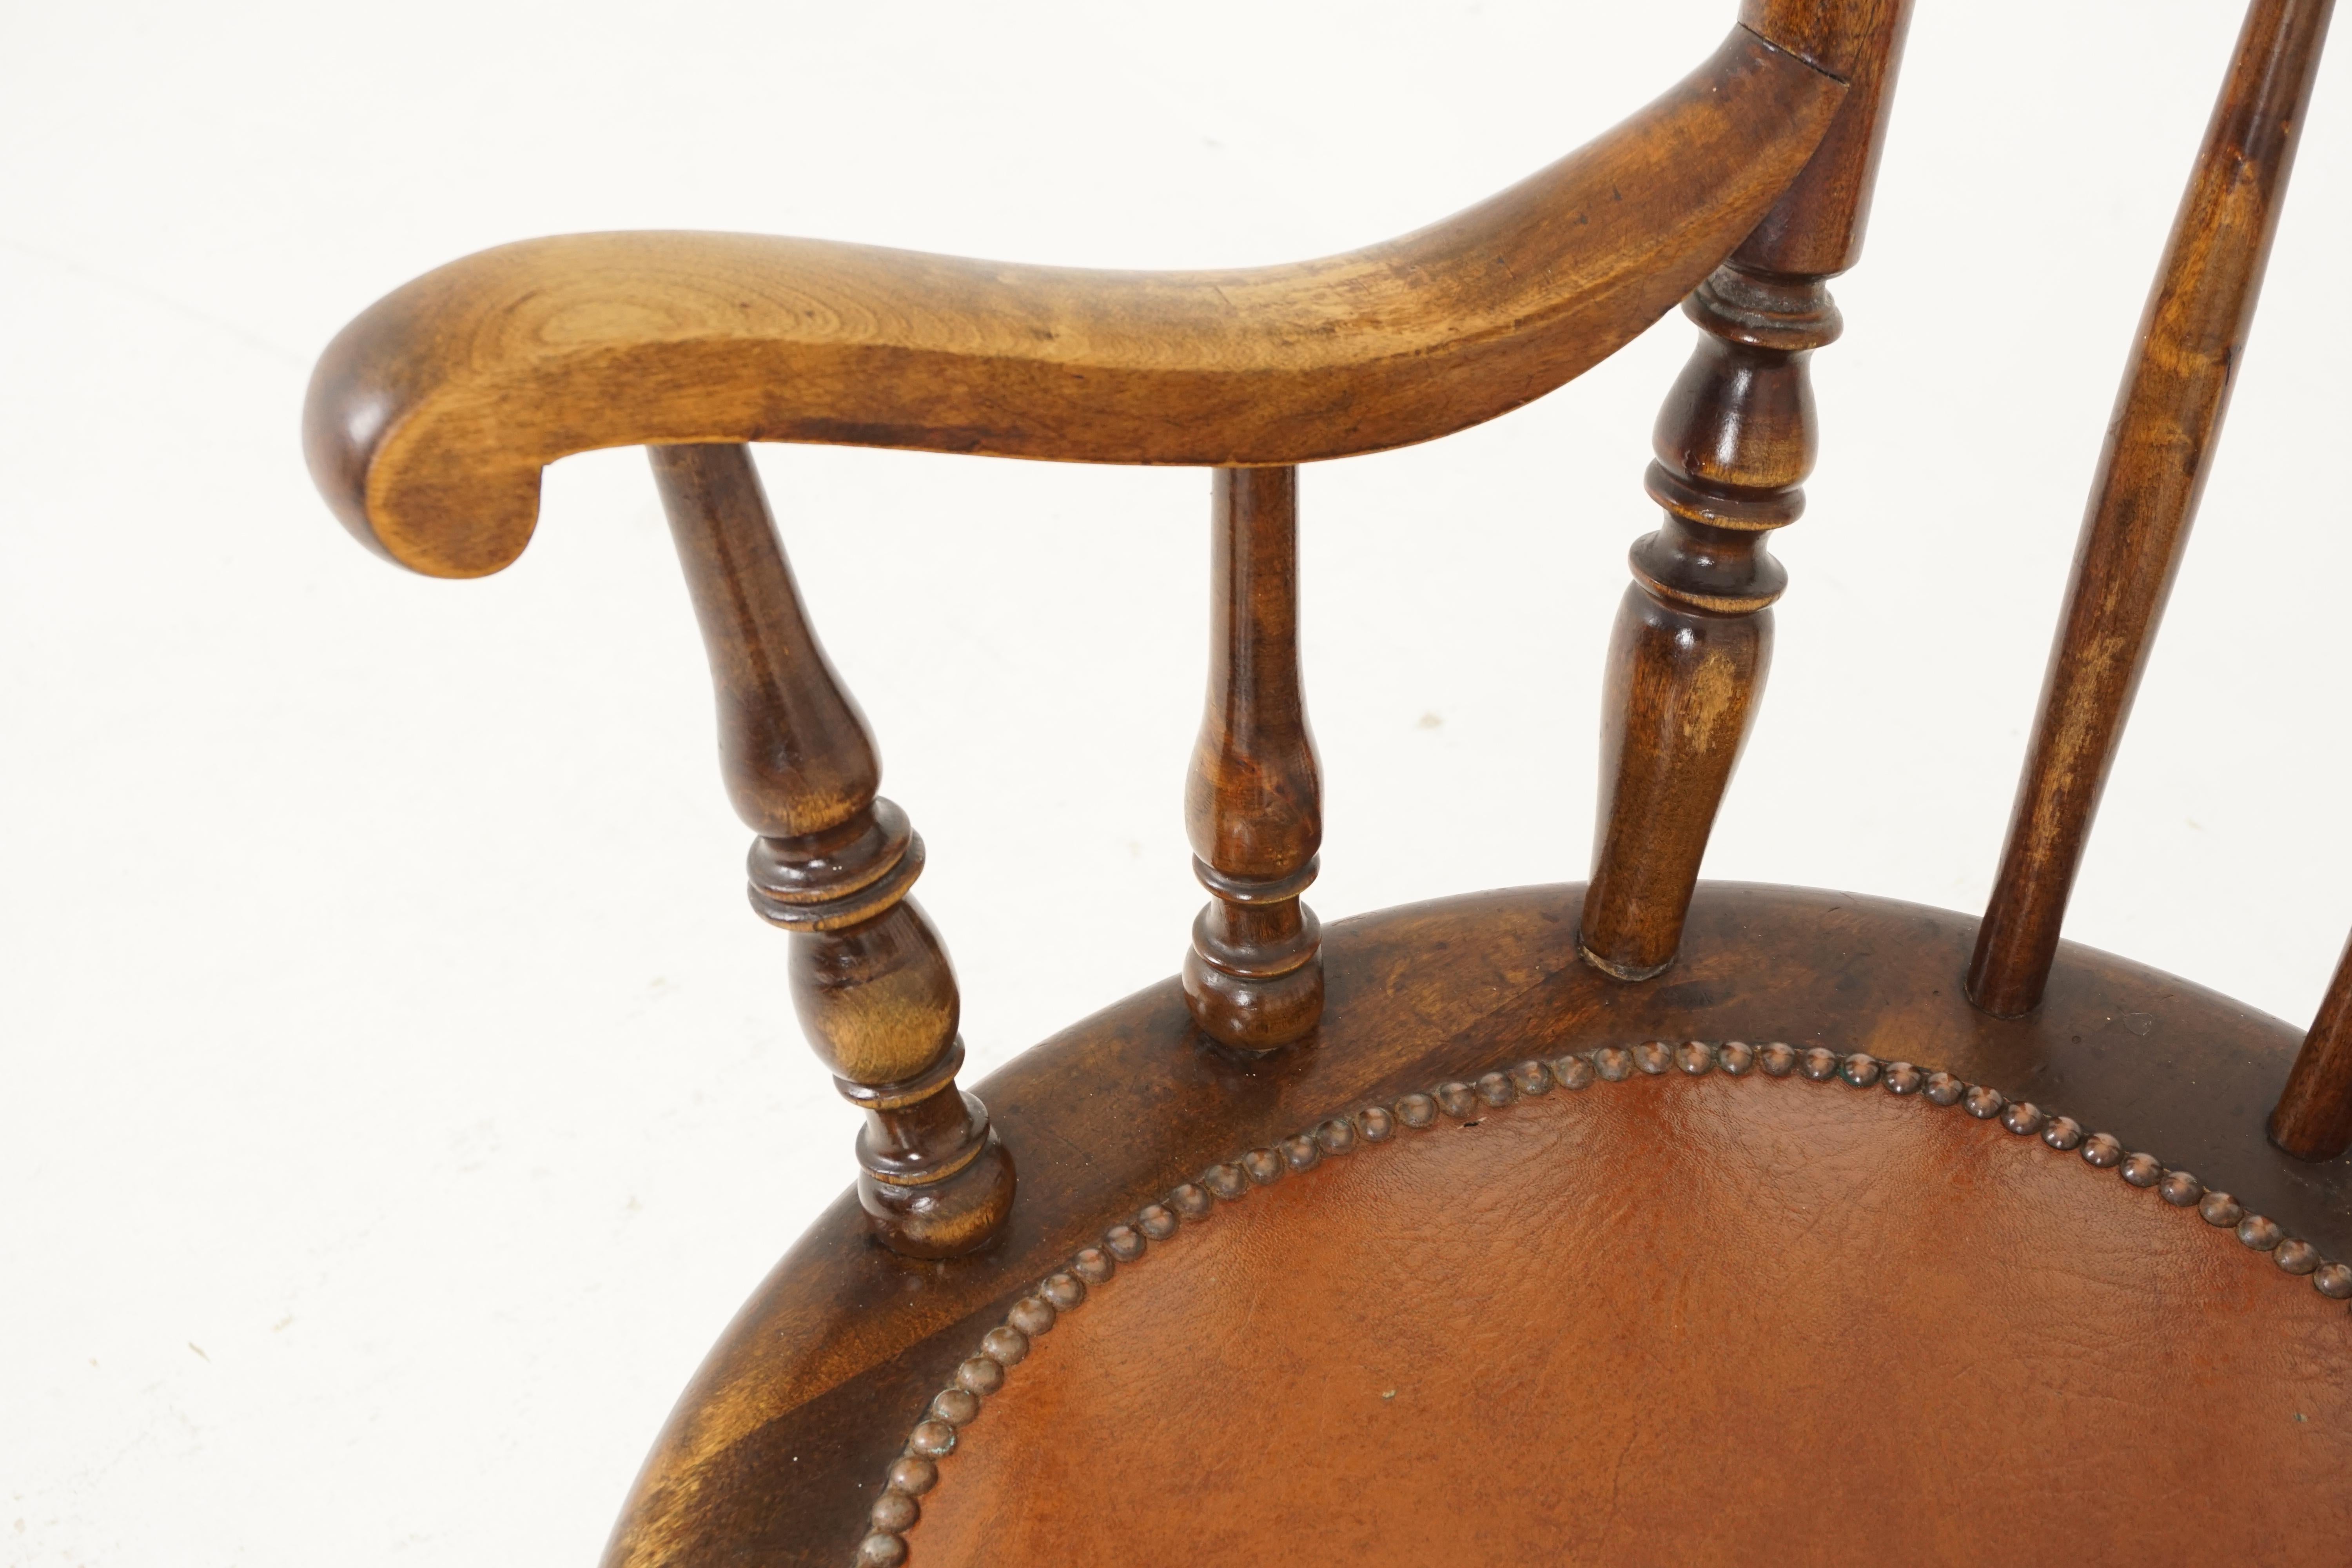 Late 19th Century Antique Windsor Style Arm Chair, Open Arm Chair, Scotland 1830, B2461